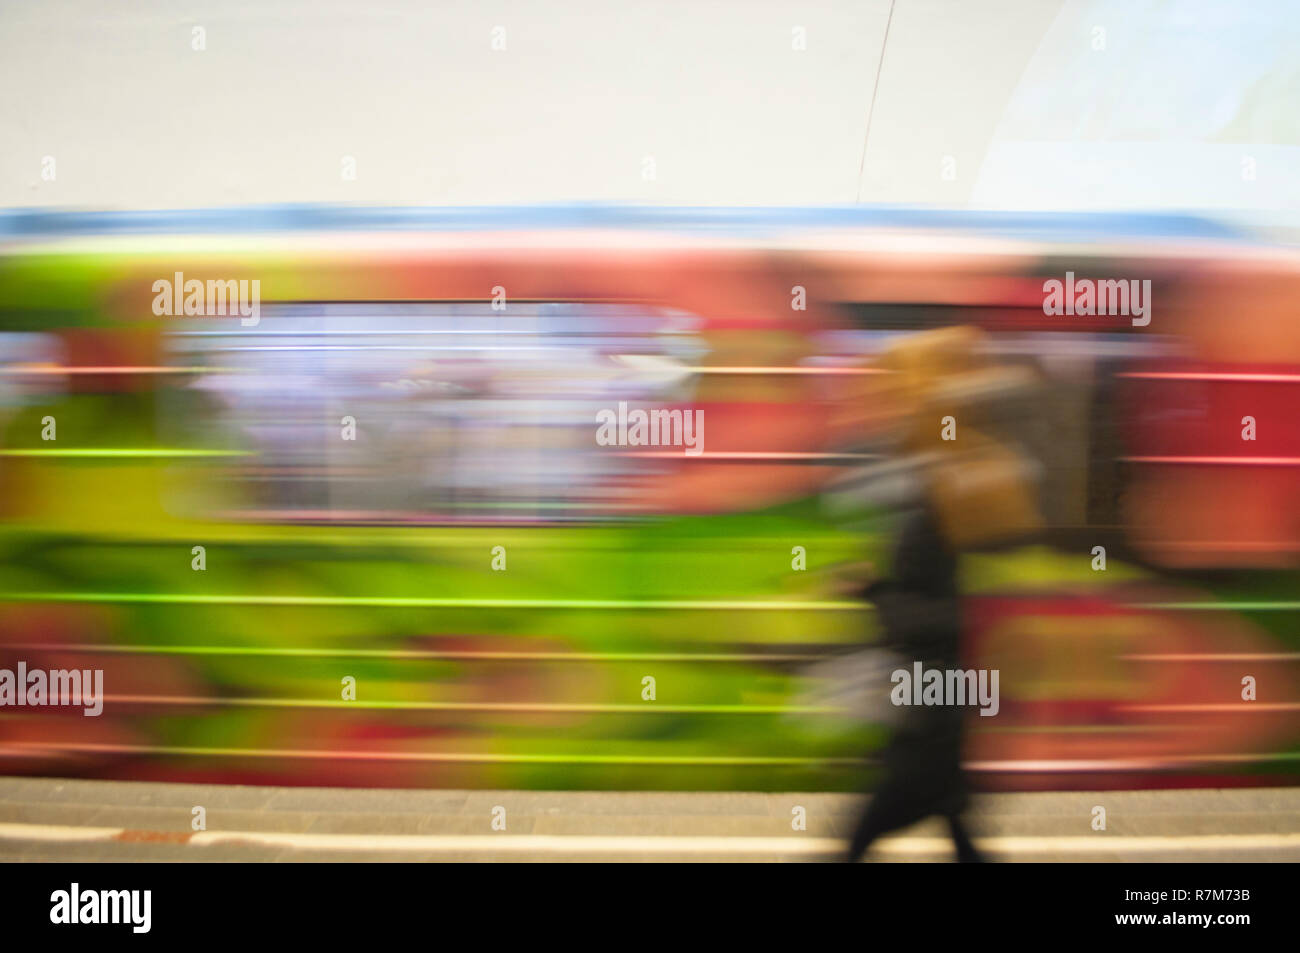 Blurred motion of the colorful train with living coral color elements in an underground station. Stock Photo